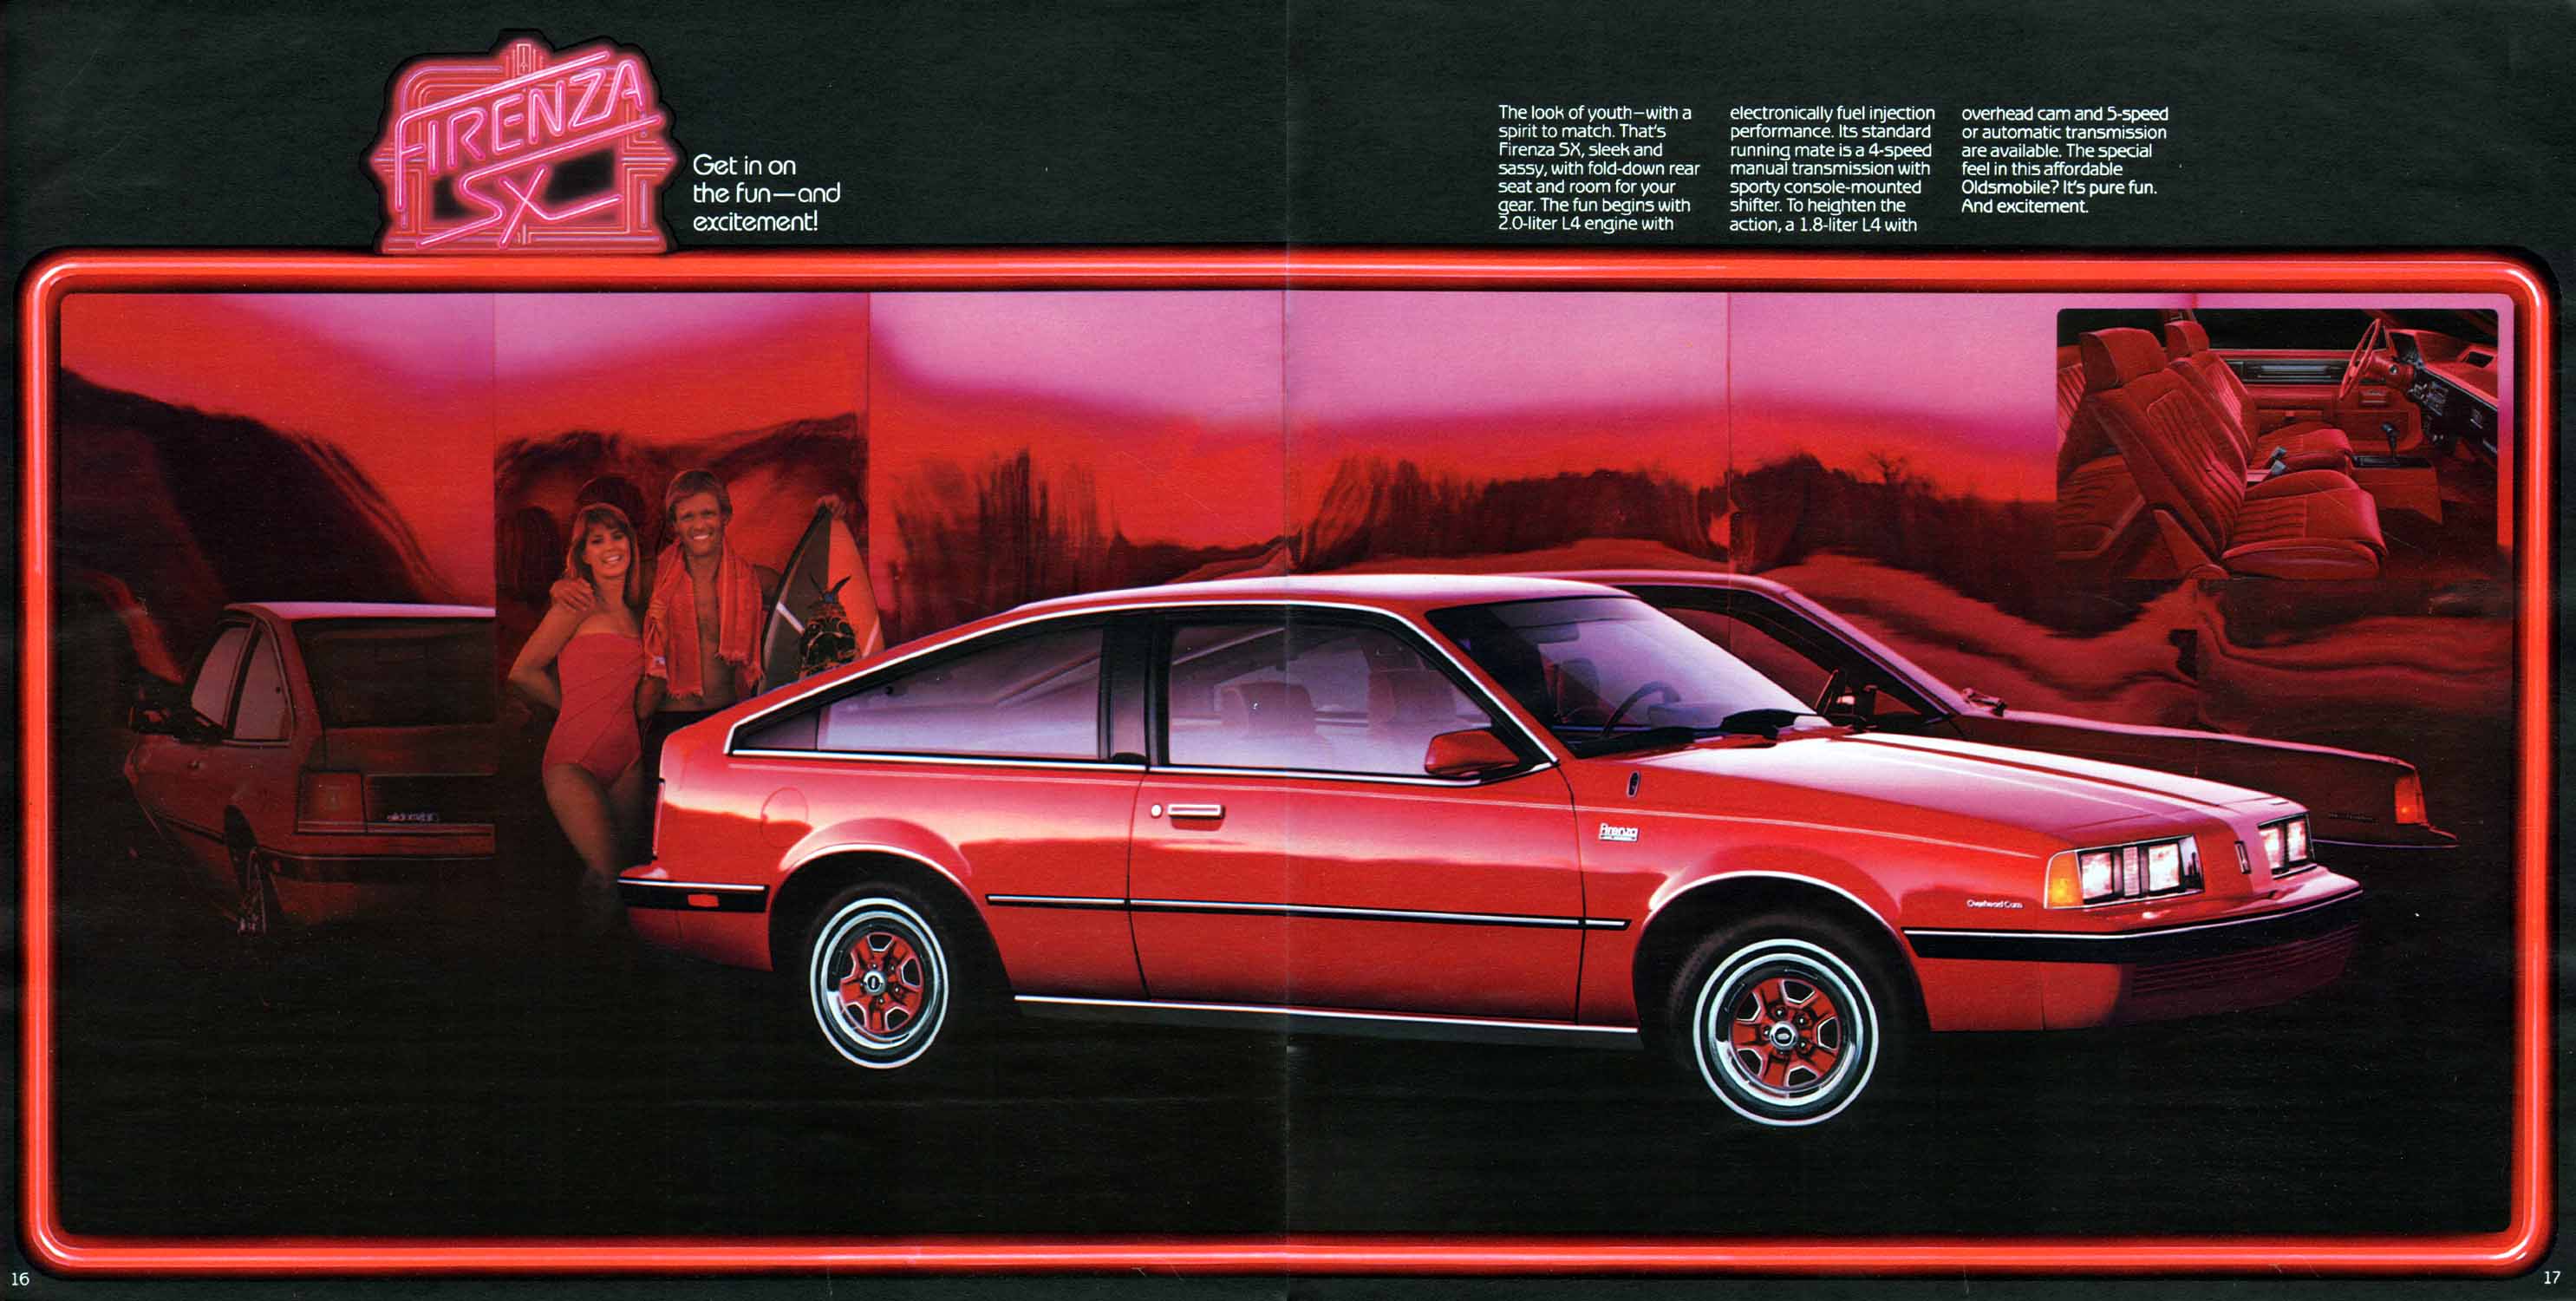 1985_Oldsmobile_Small_Size-16-17